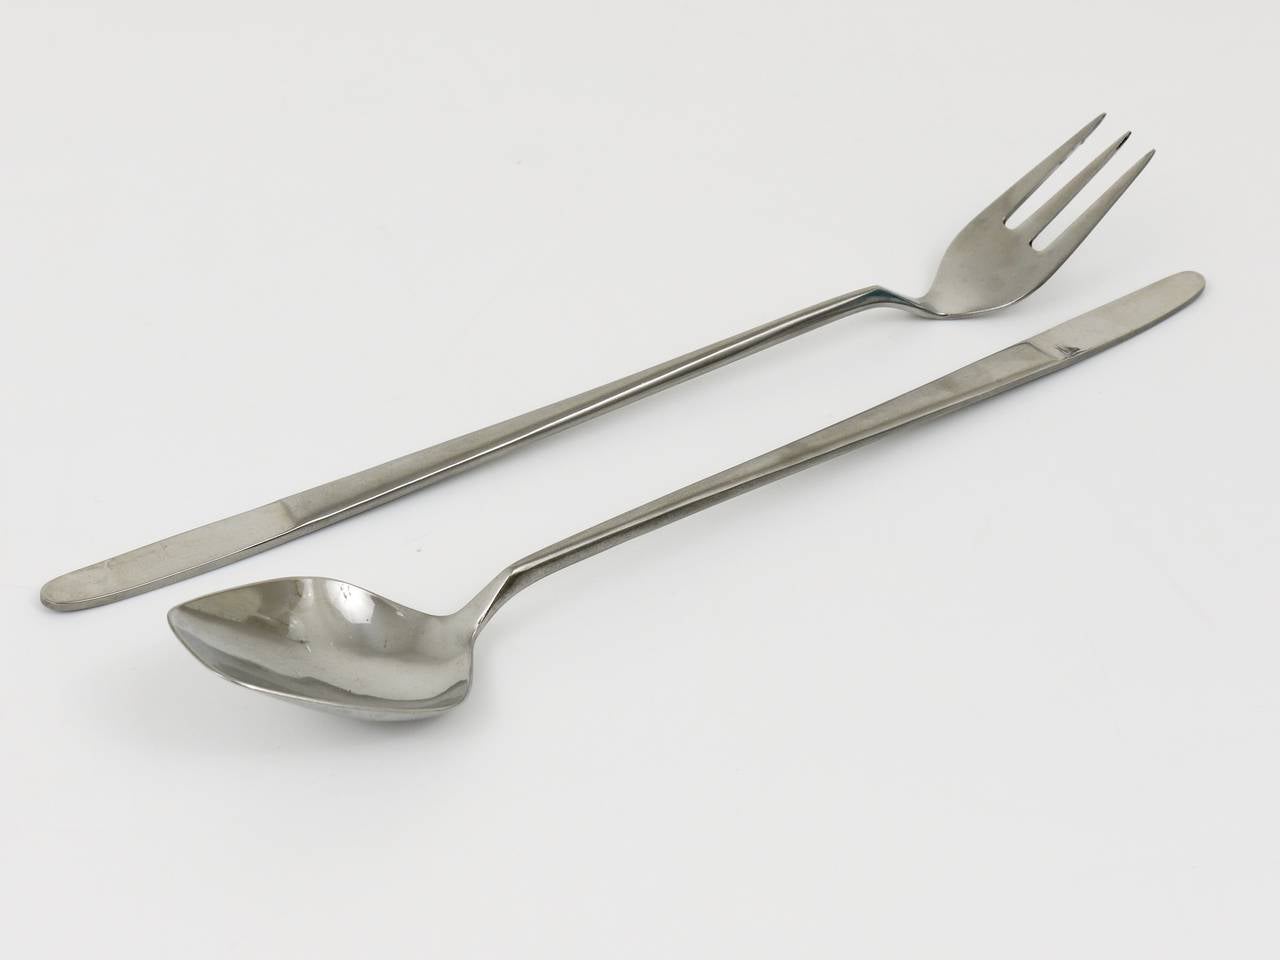 Stainless Steel Amboss Austria 2070 Flatware Cutlery for Six Persons, by Helmut Alder, 1960s